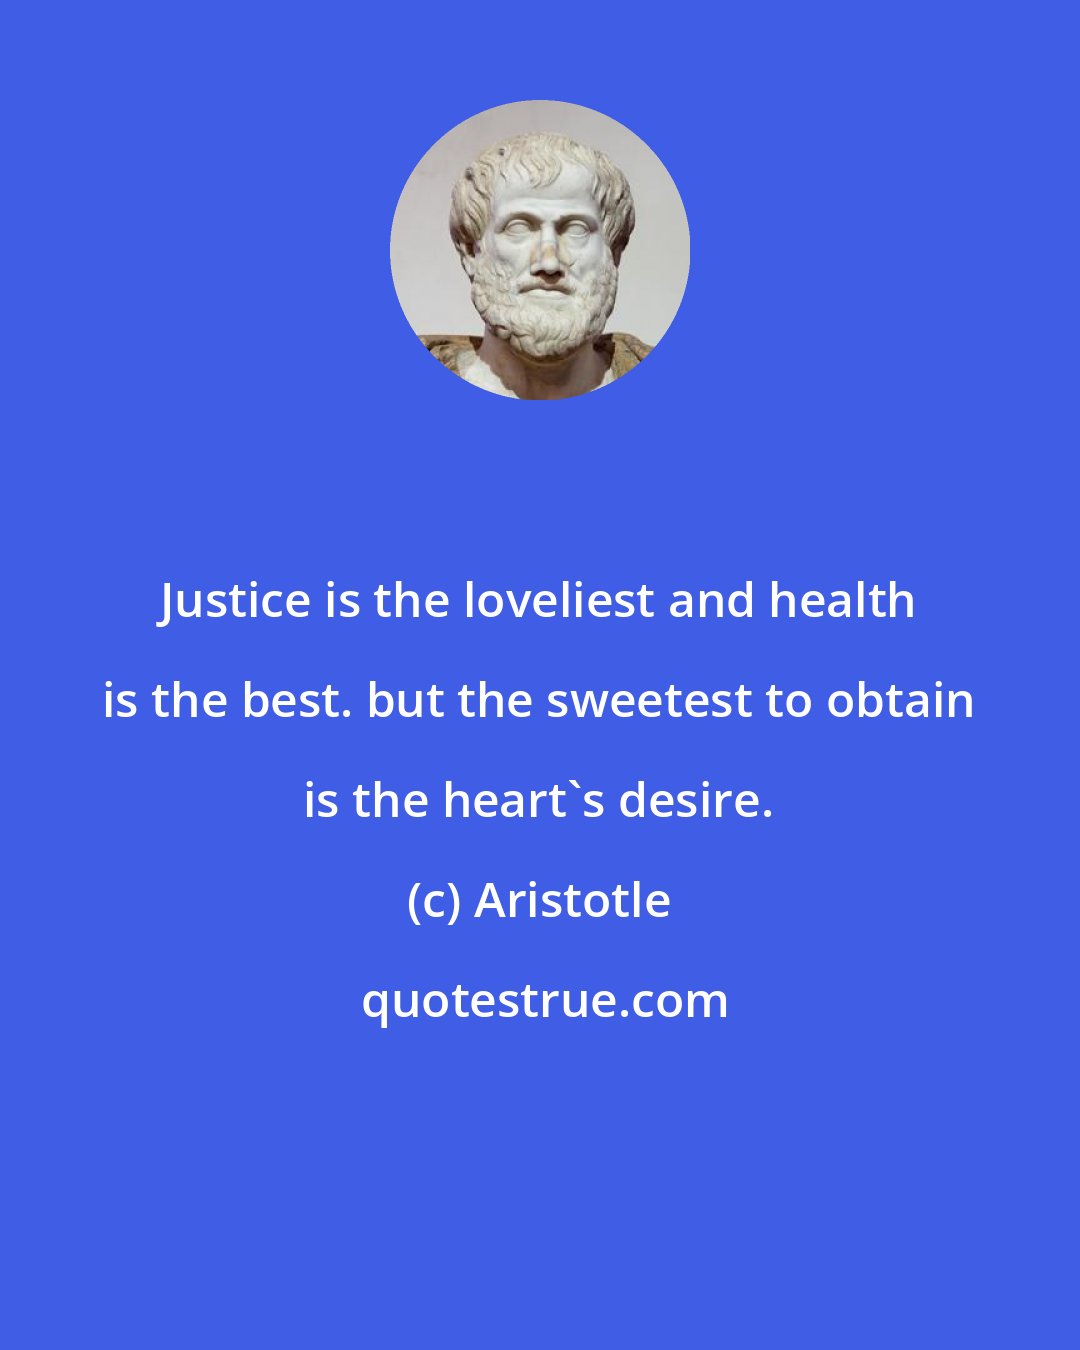 Aristotle: Justice is the loveliest and health is the best. but the sweetest to obtain is the heart's desire.